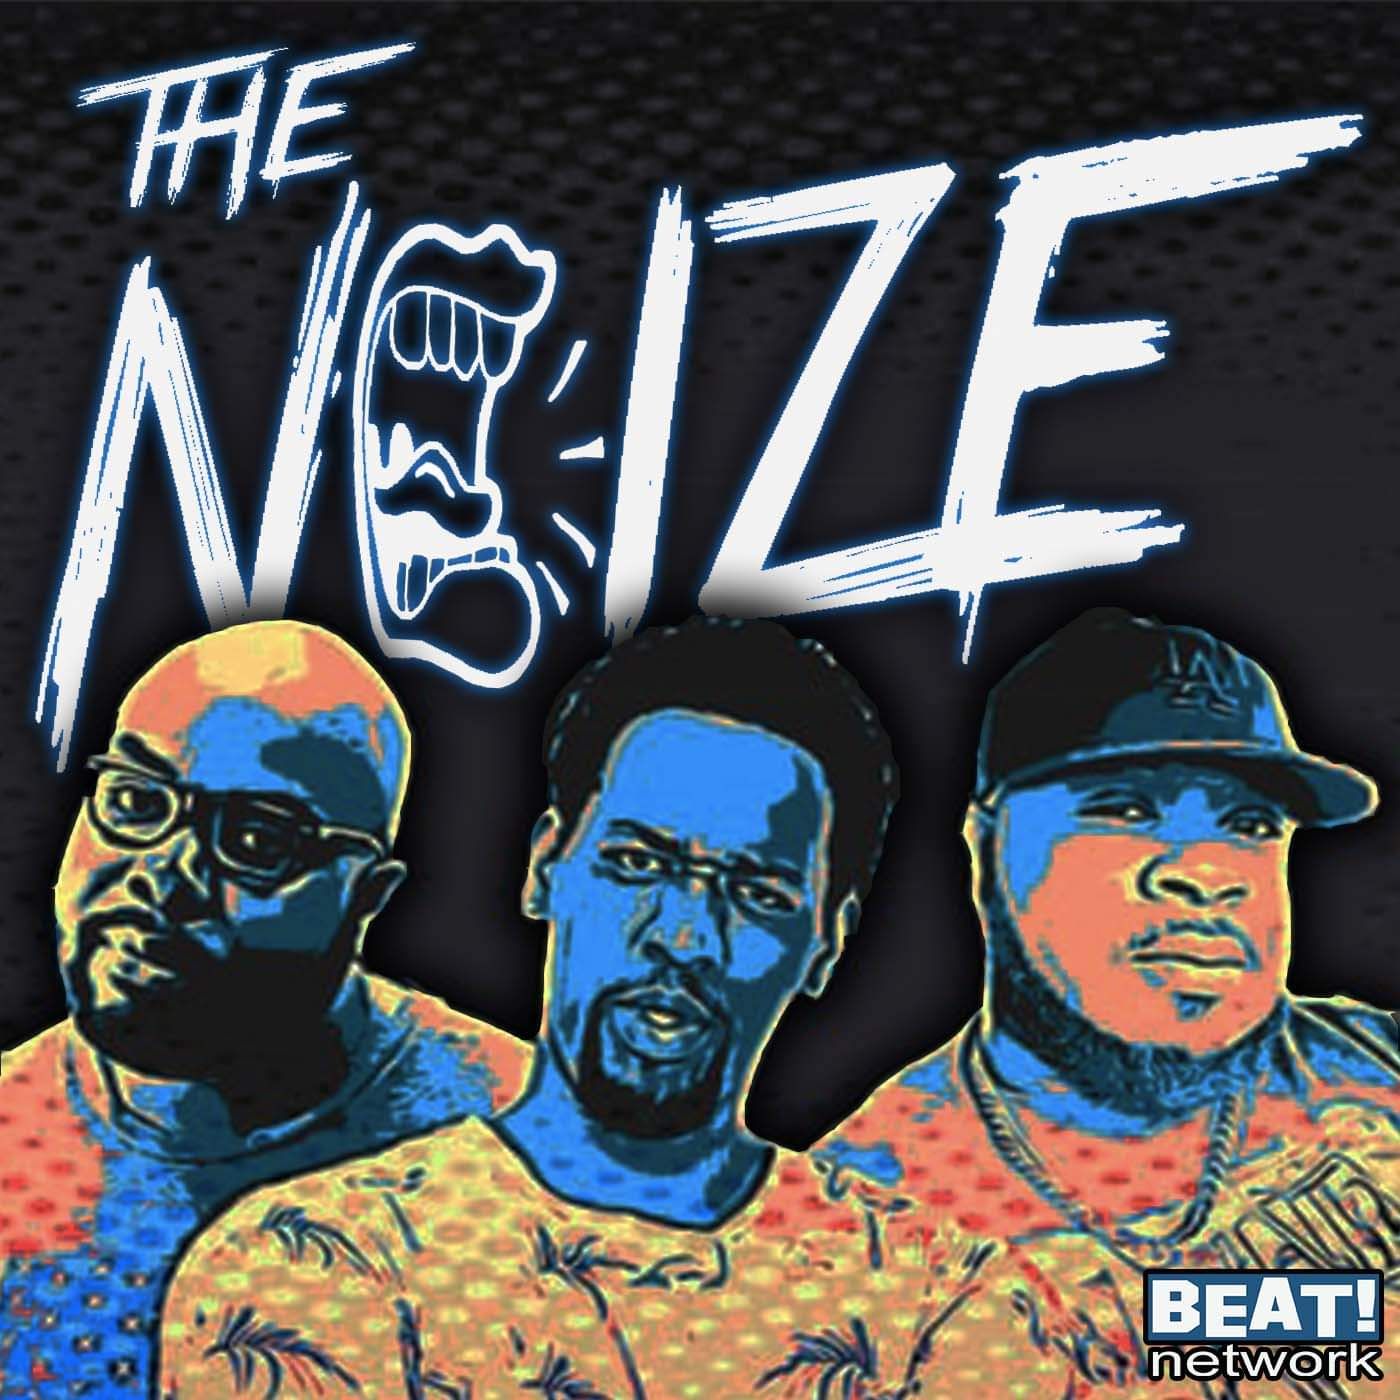 The Noize